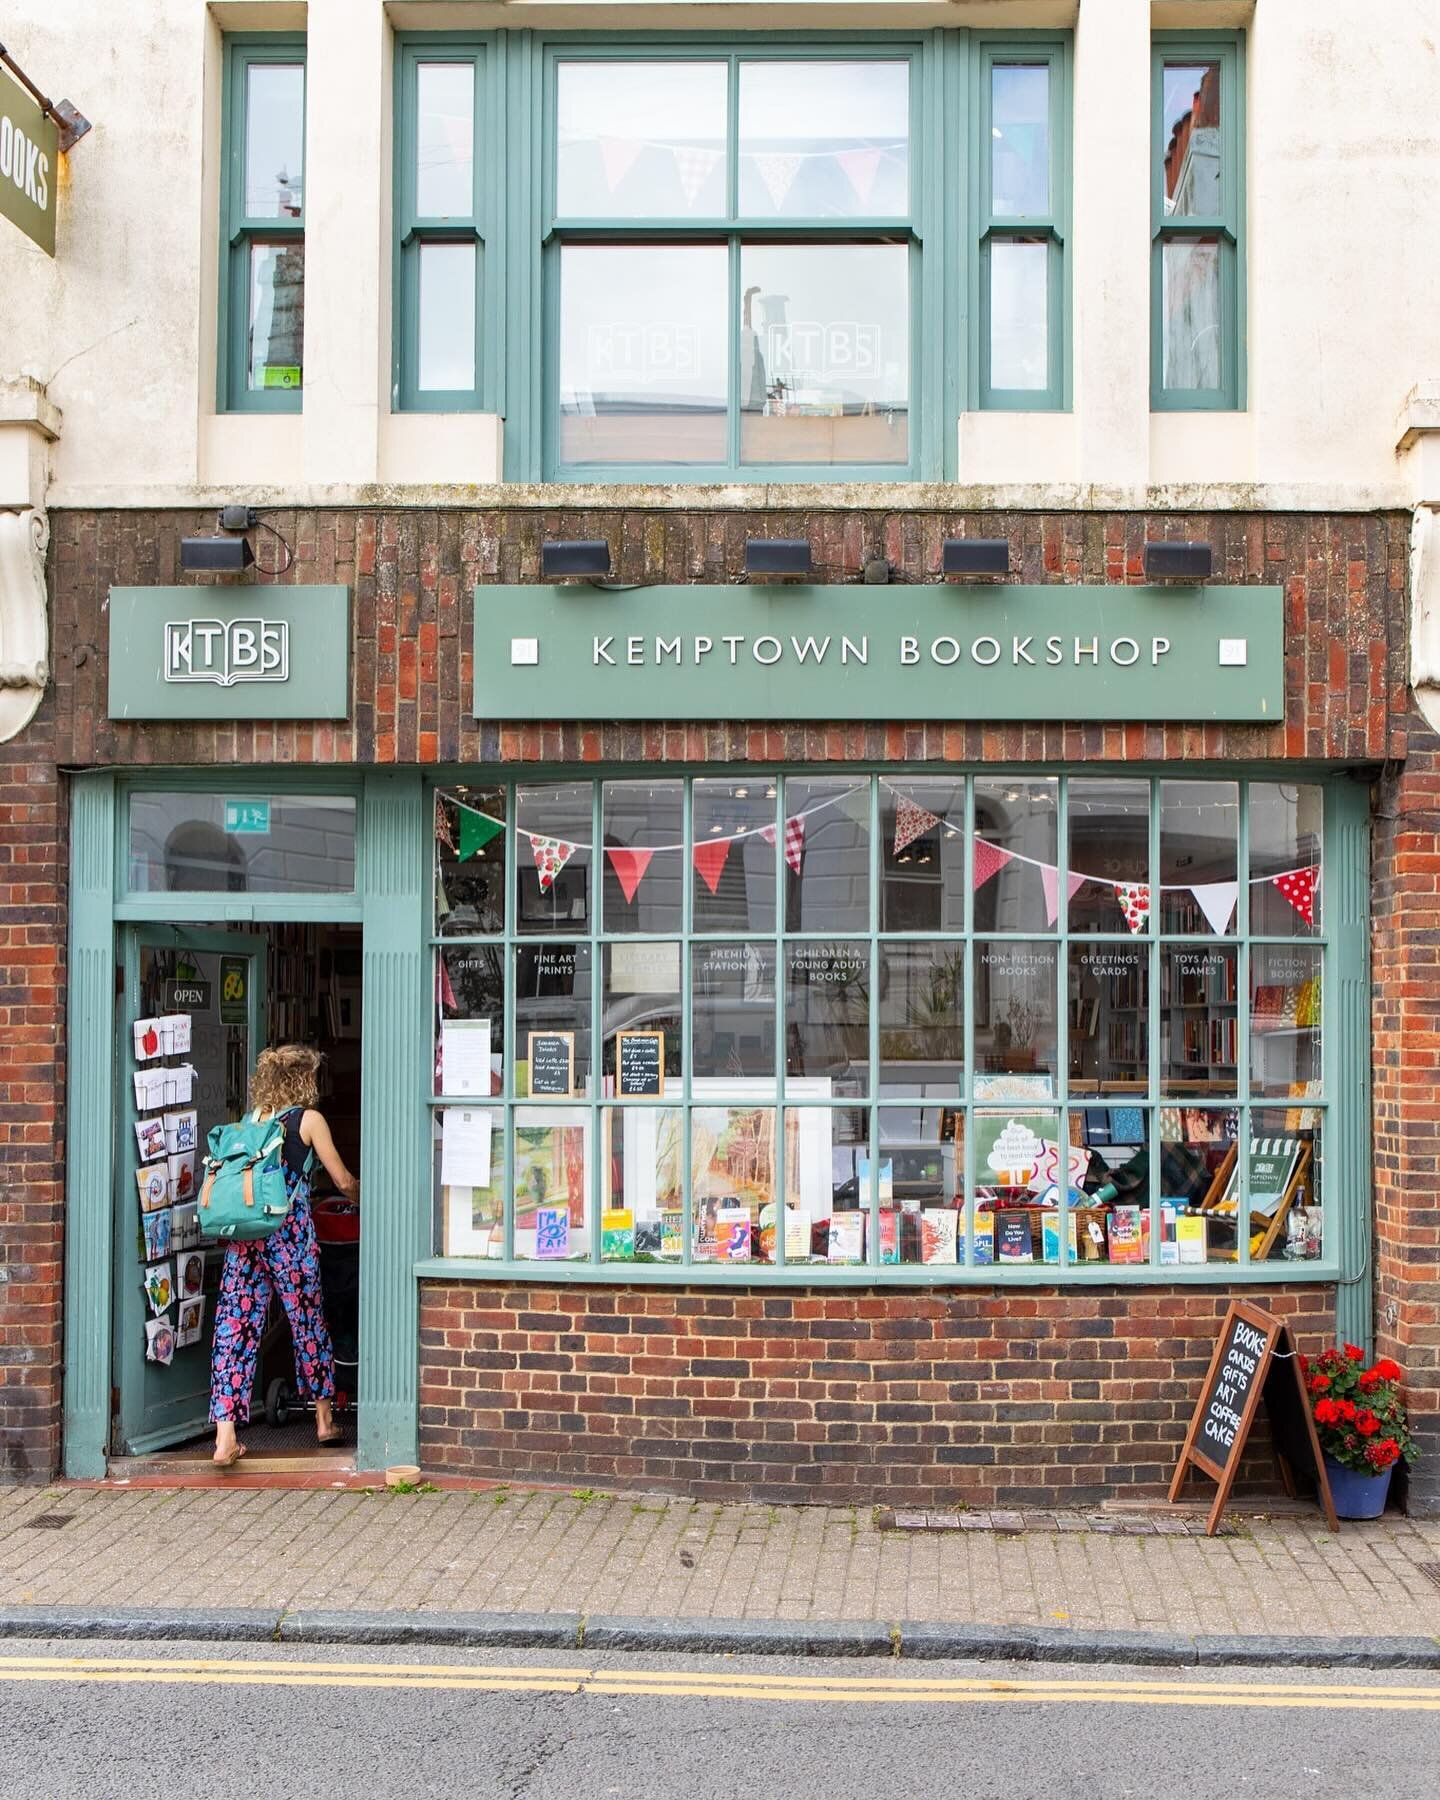 TONIGHT we'll be celebrating the launch of 'An Opinionated Guide to Brighton' at the one and only @kemptownbookshop! ⁠
⁠
As described by @joeminihane in the book, &quot;with regular events including author Q&amp;As and creative writing classes in the